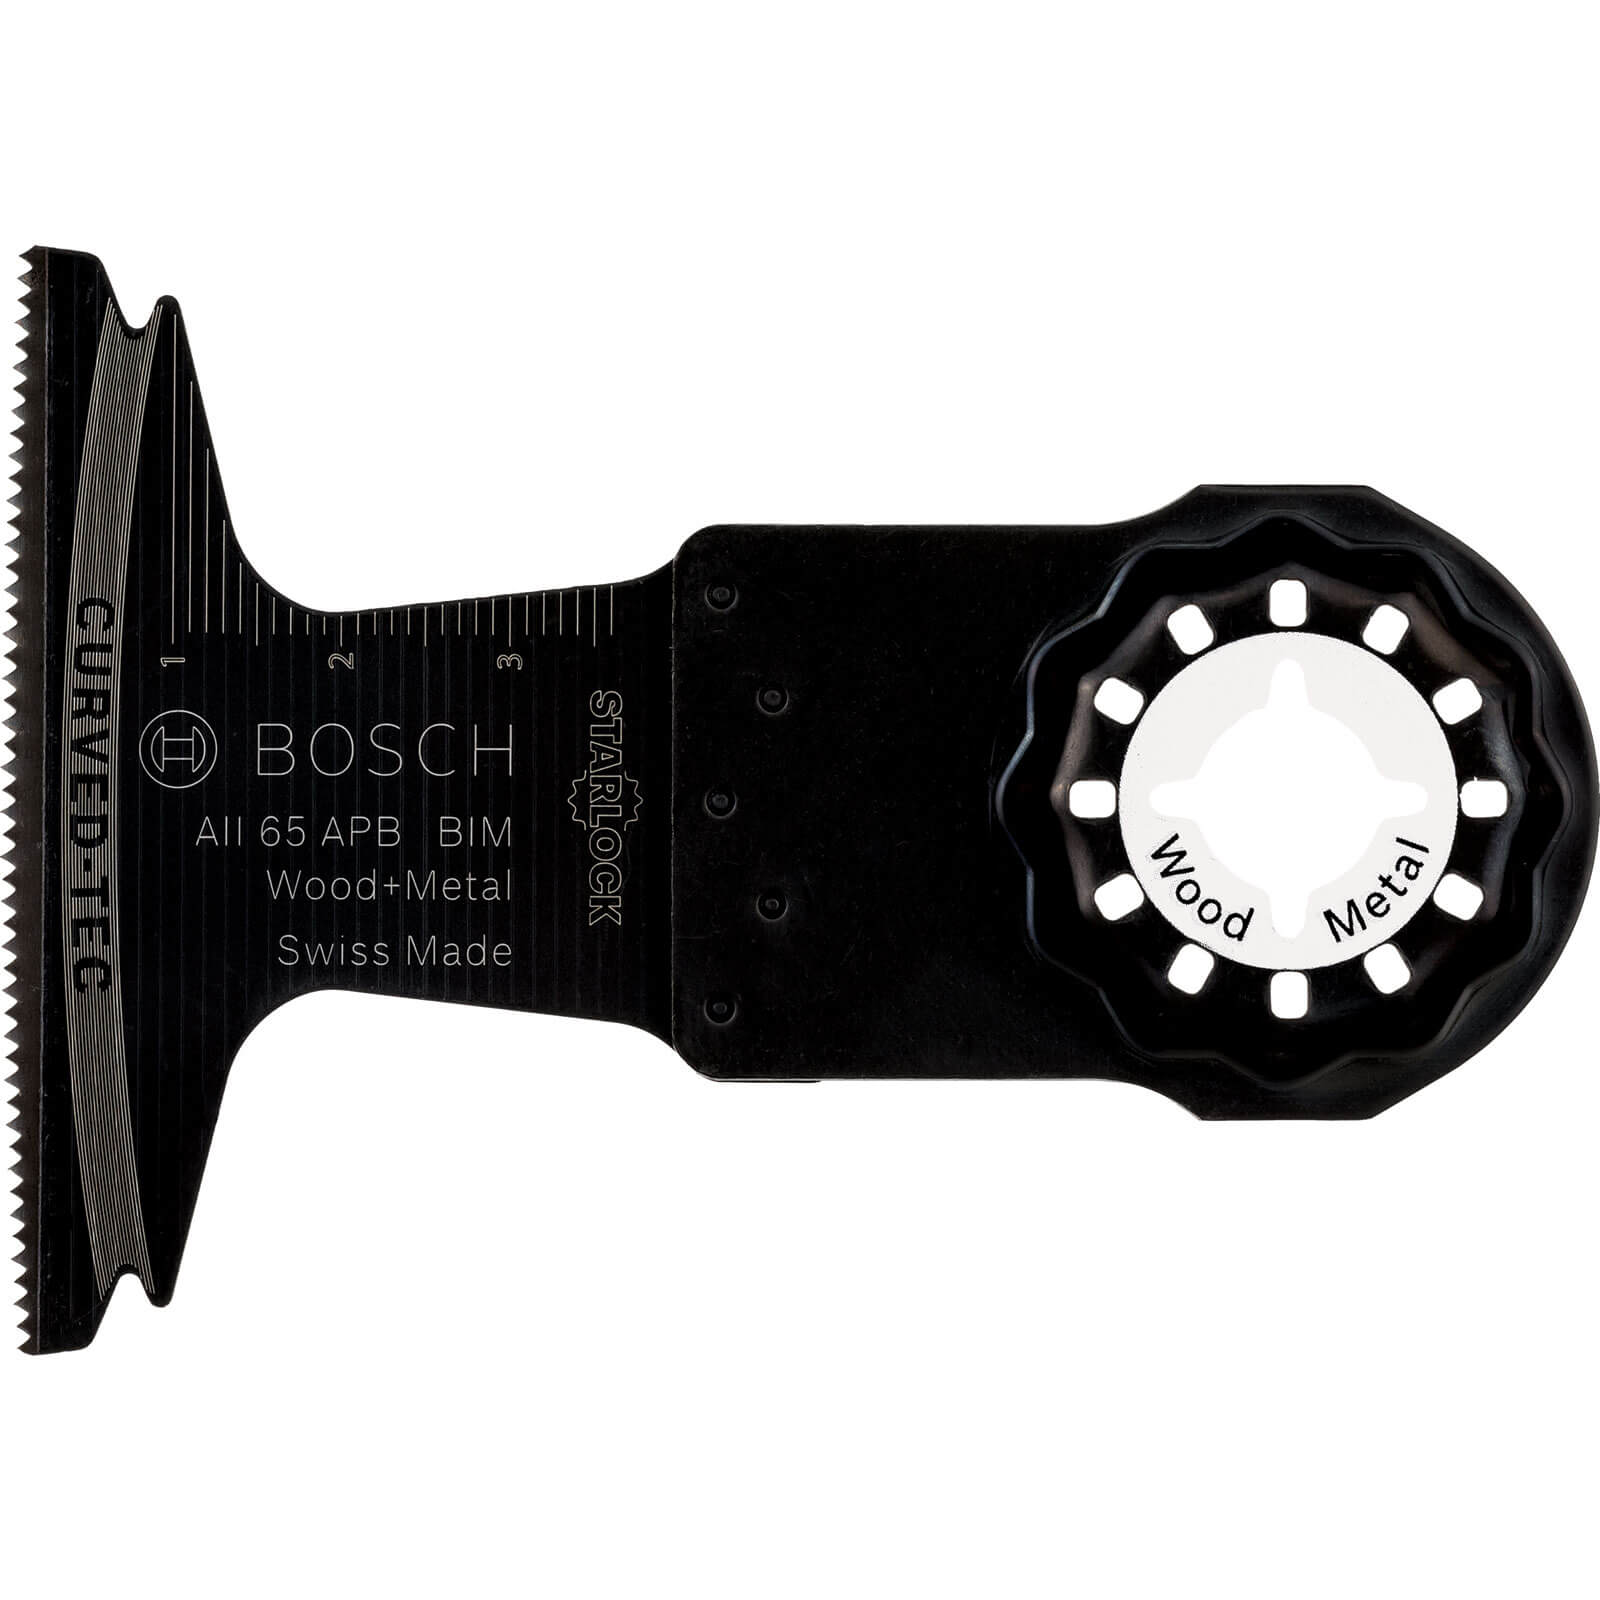 Bosch All 65 APB Metal and Wood Oscillating Multi Tool Plunge Saw Blade 65mm Pack of 5